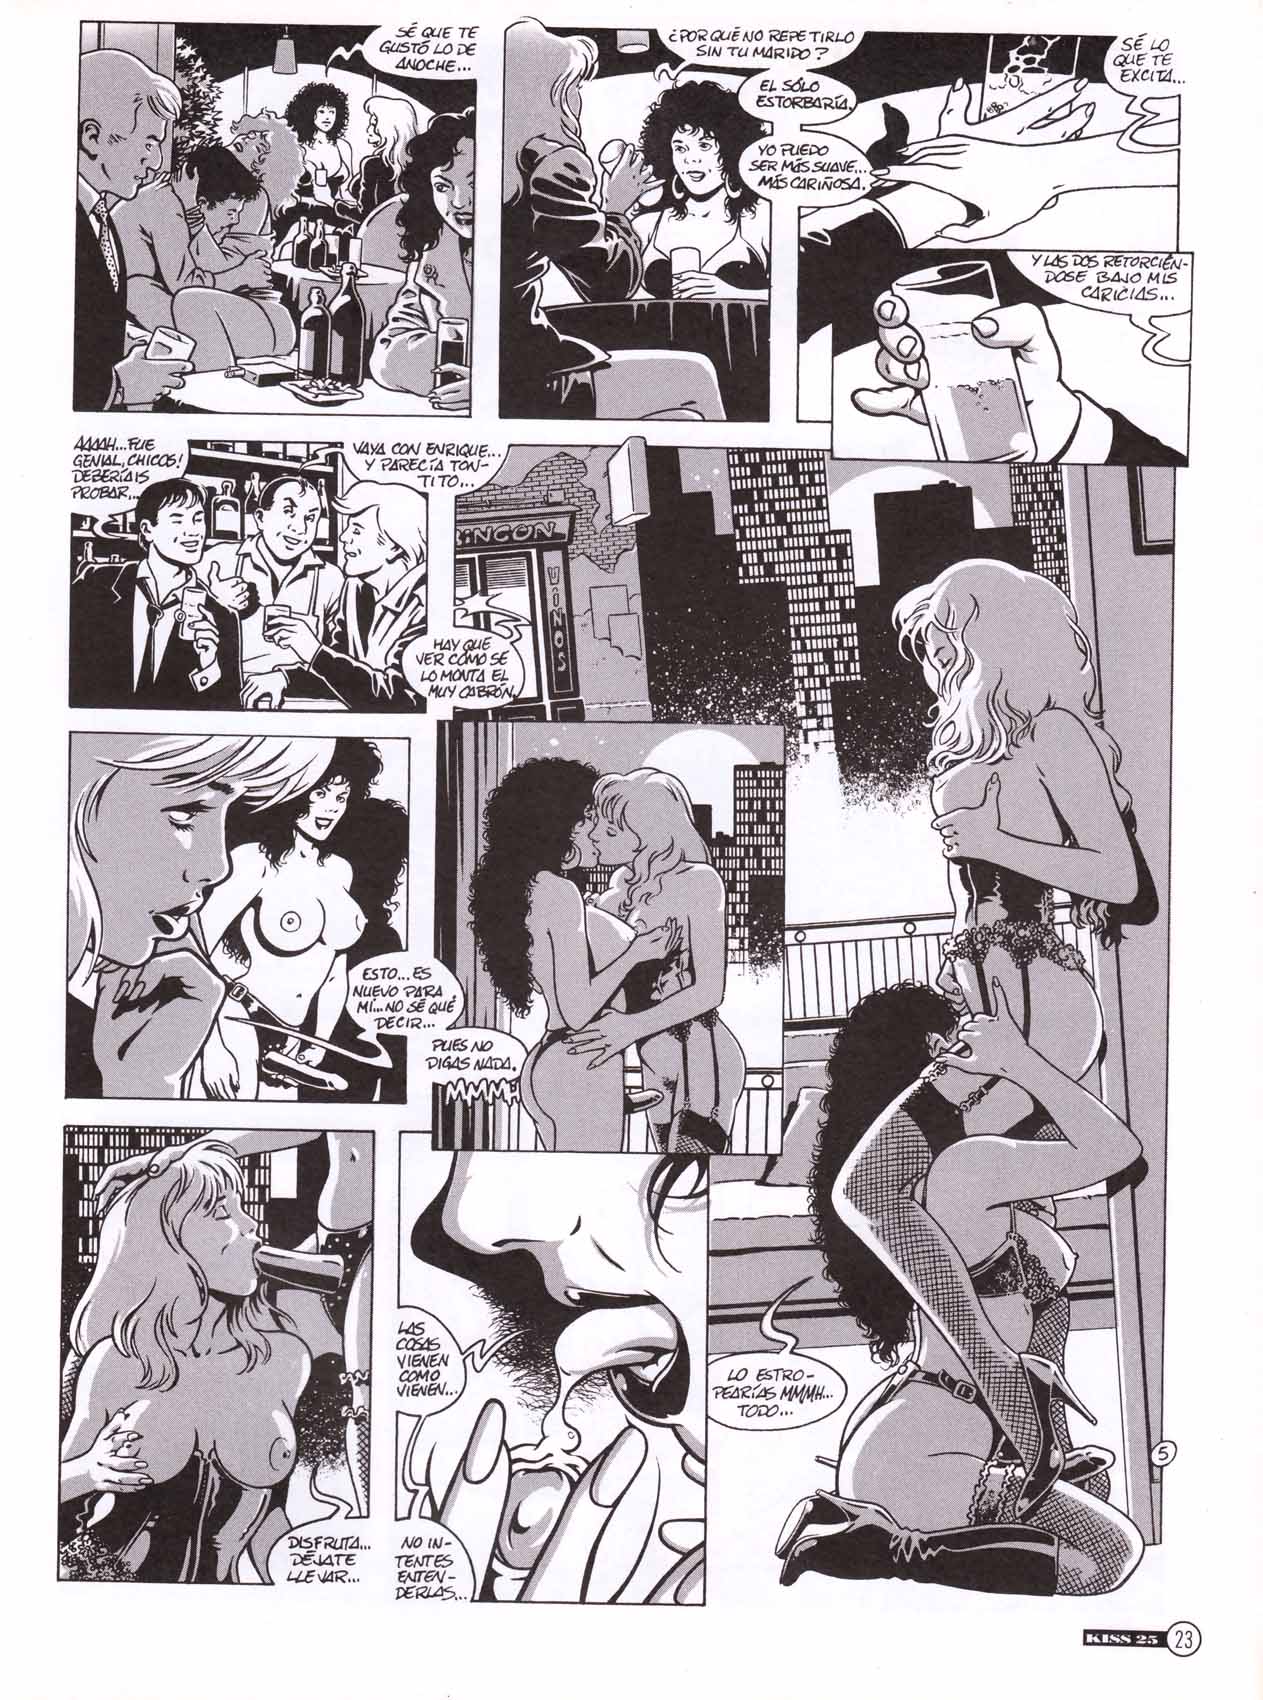 Kiss Comix 025 image number 22